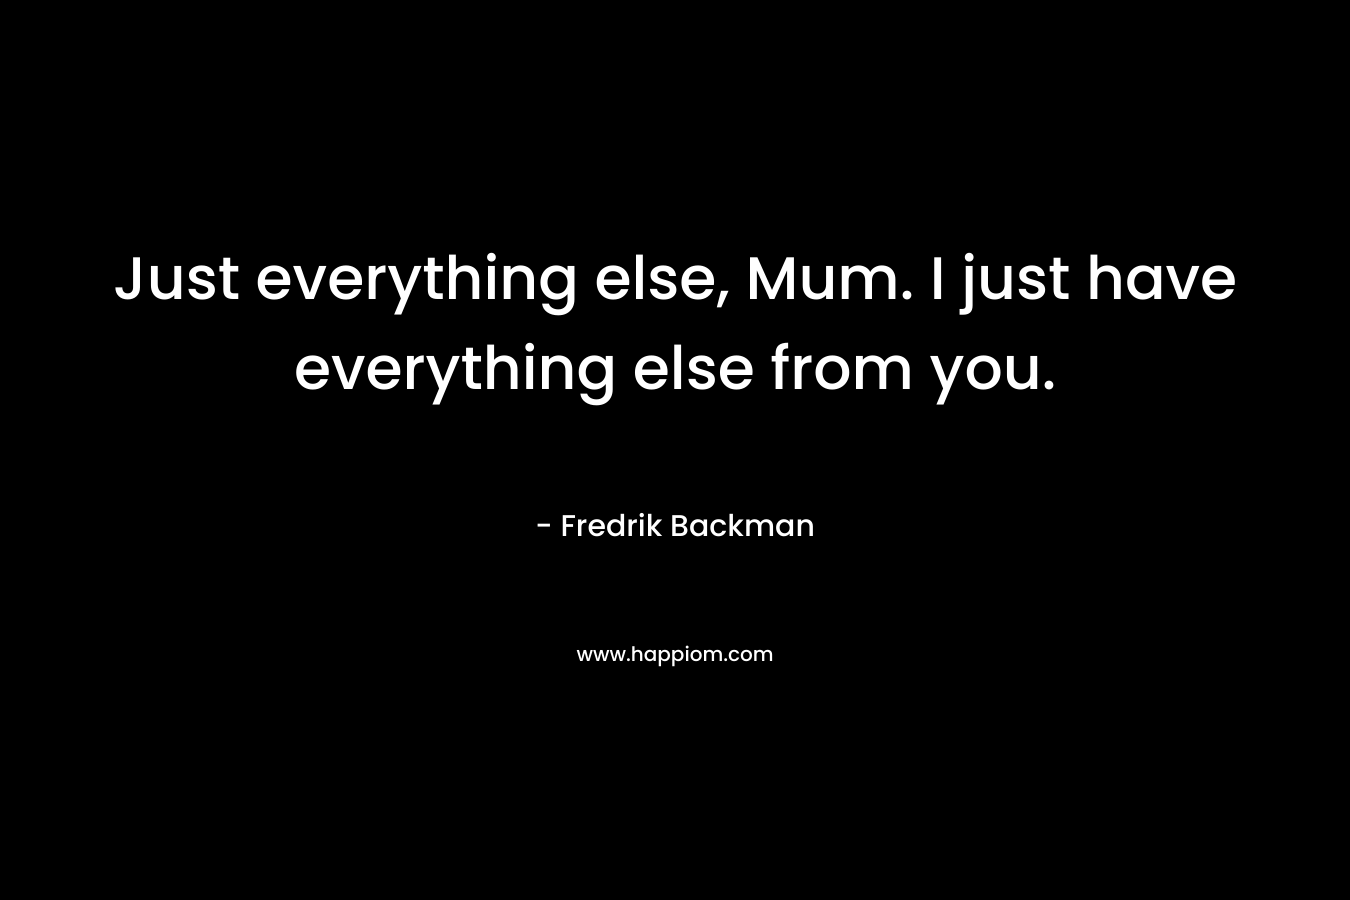 Just everything else, Mum. I just have everything else from you.